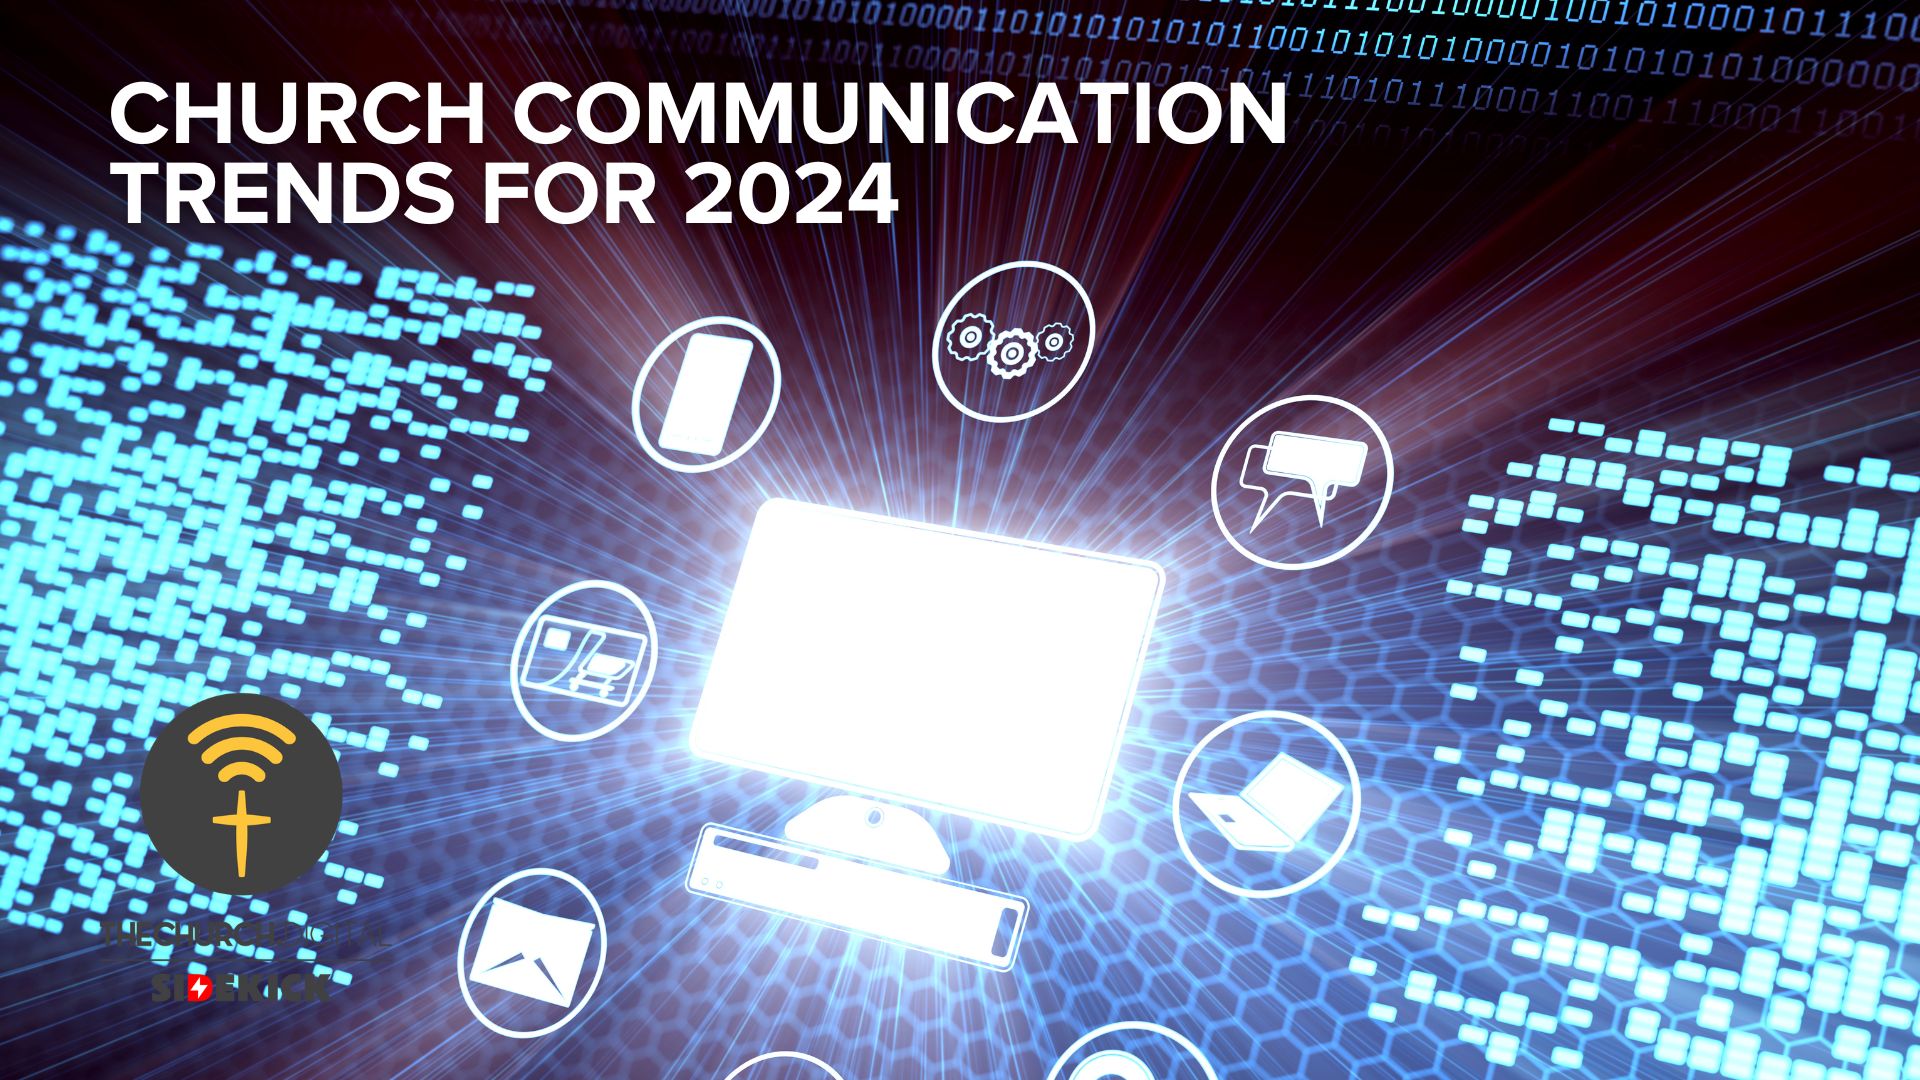 Church Communication Trends for 2024